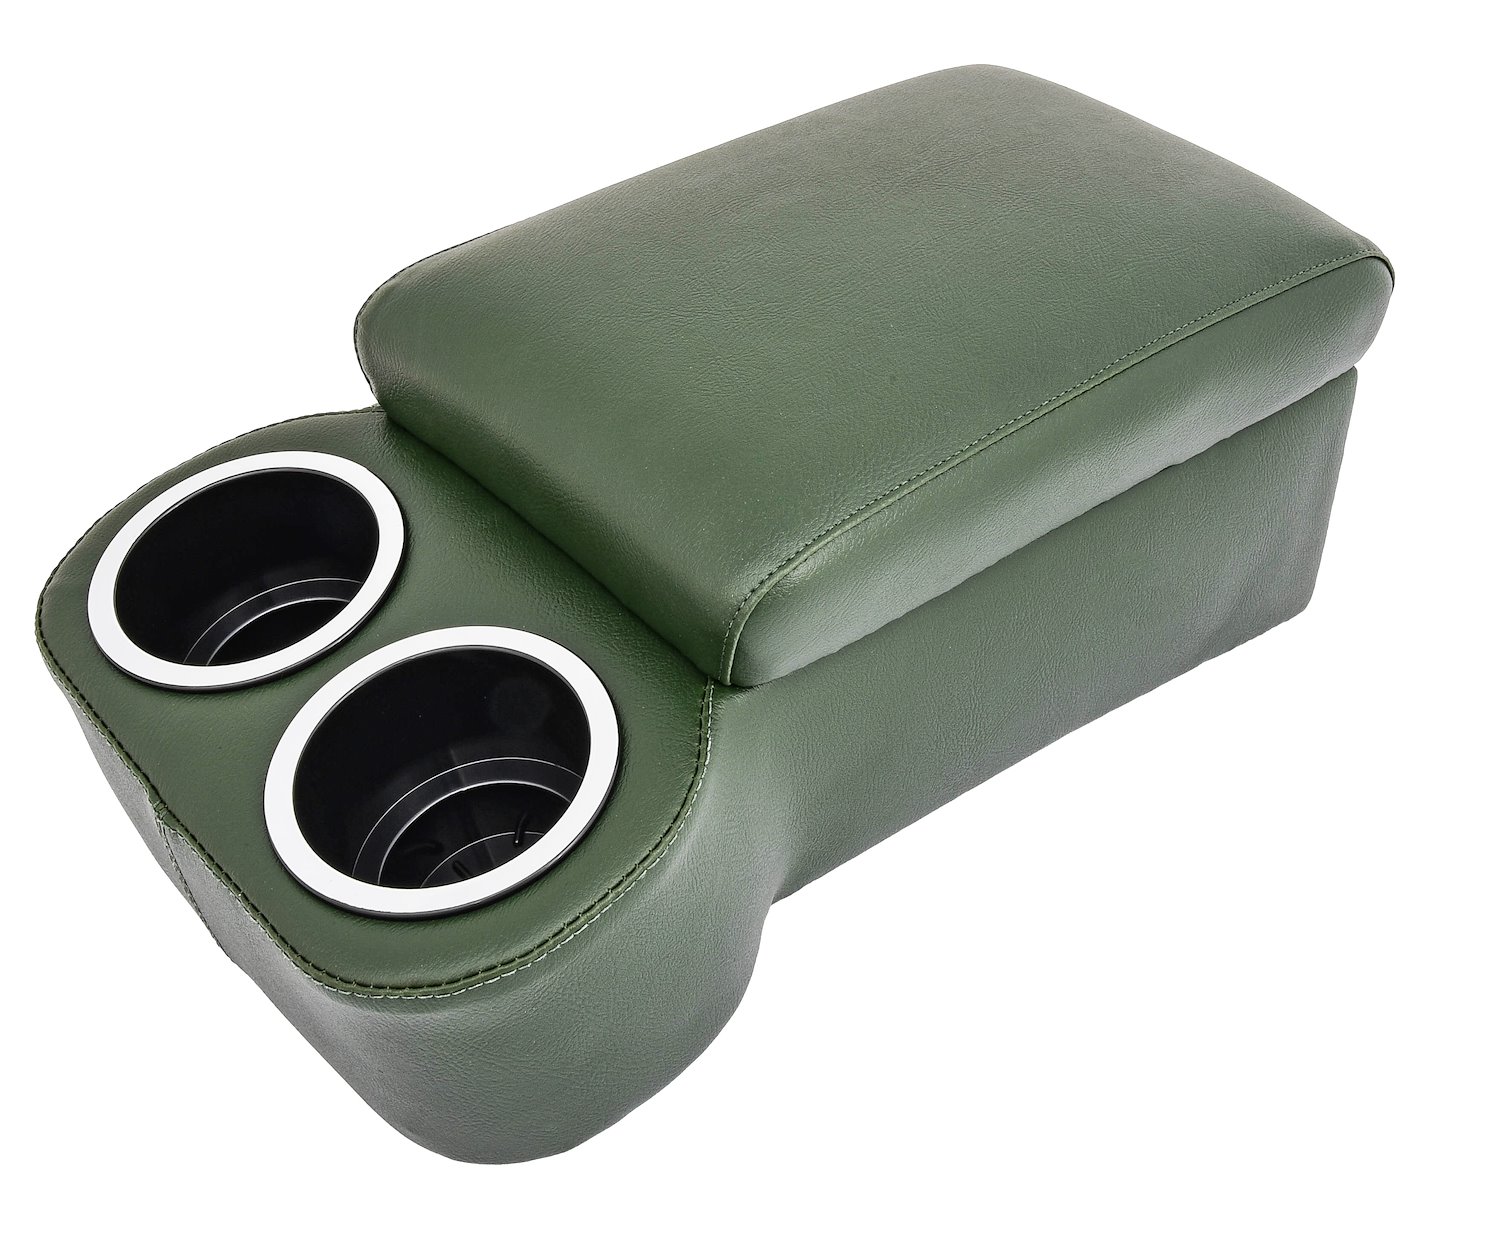 Bench Seat Cruiser Console For Full-Depth Bench Seat Vehicles [Dark Green, (2) Large Cup Holders]